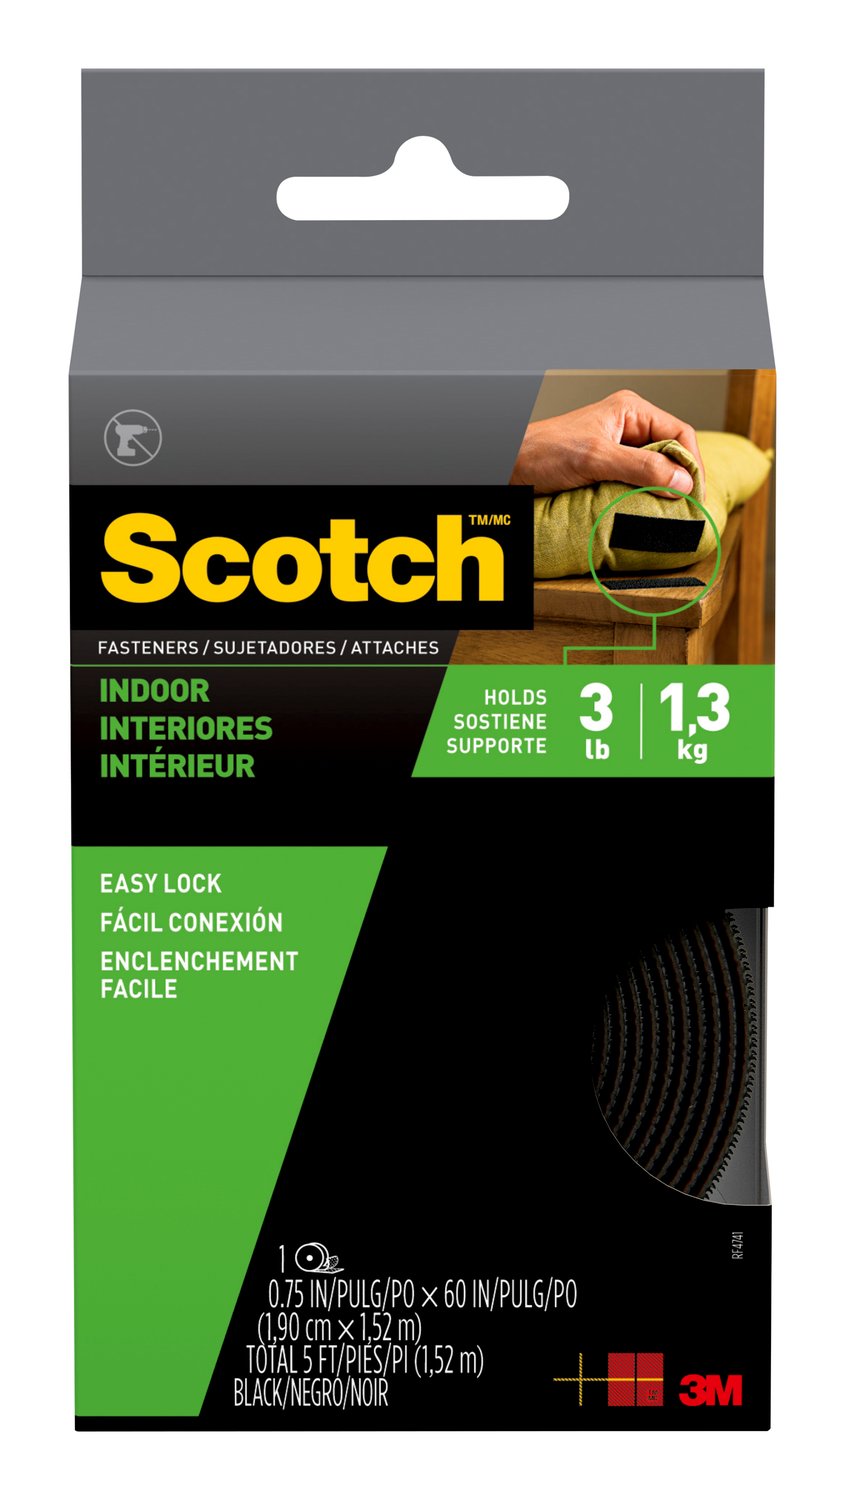 7100104584 - Scotch Indoor Fasteners RF4741, 3/4 in x 5 ft (19,0 mm x 1,52 m) Black
1 Set of Strips